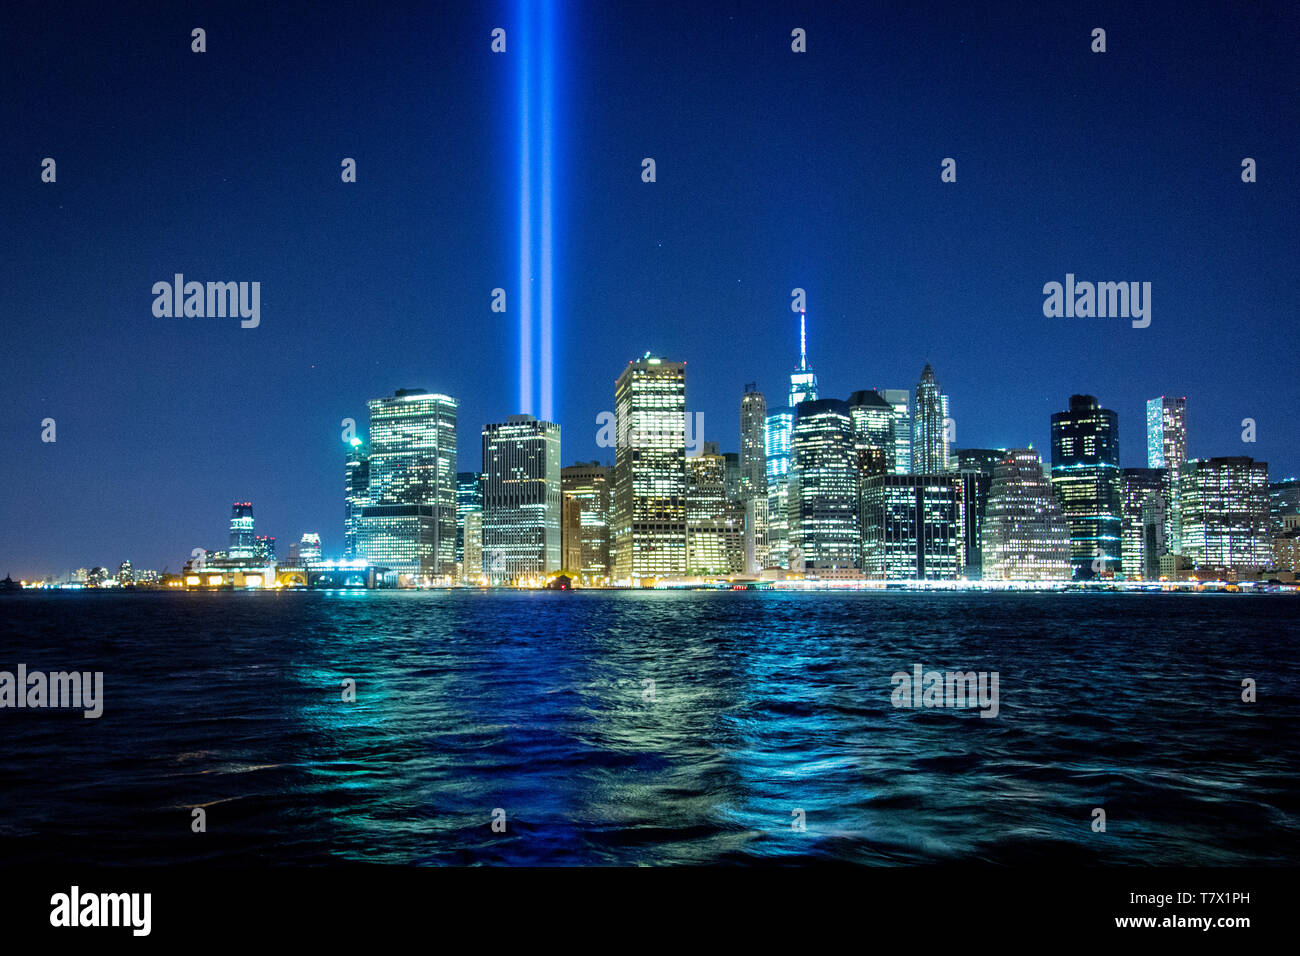 The Towers of Light beam towards the sky on the 13th anniversary of the September 11 attack that brought down the World Trade Center and killed 2996 people. Stock Photo